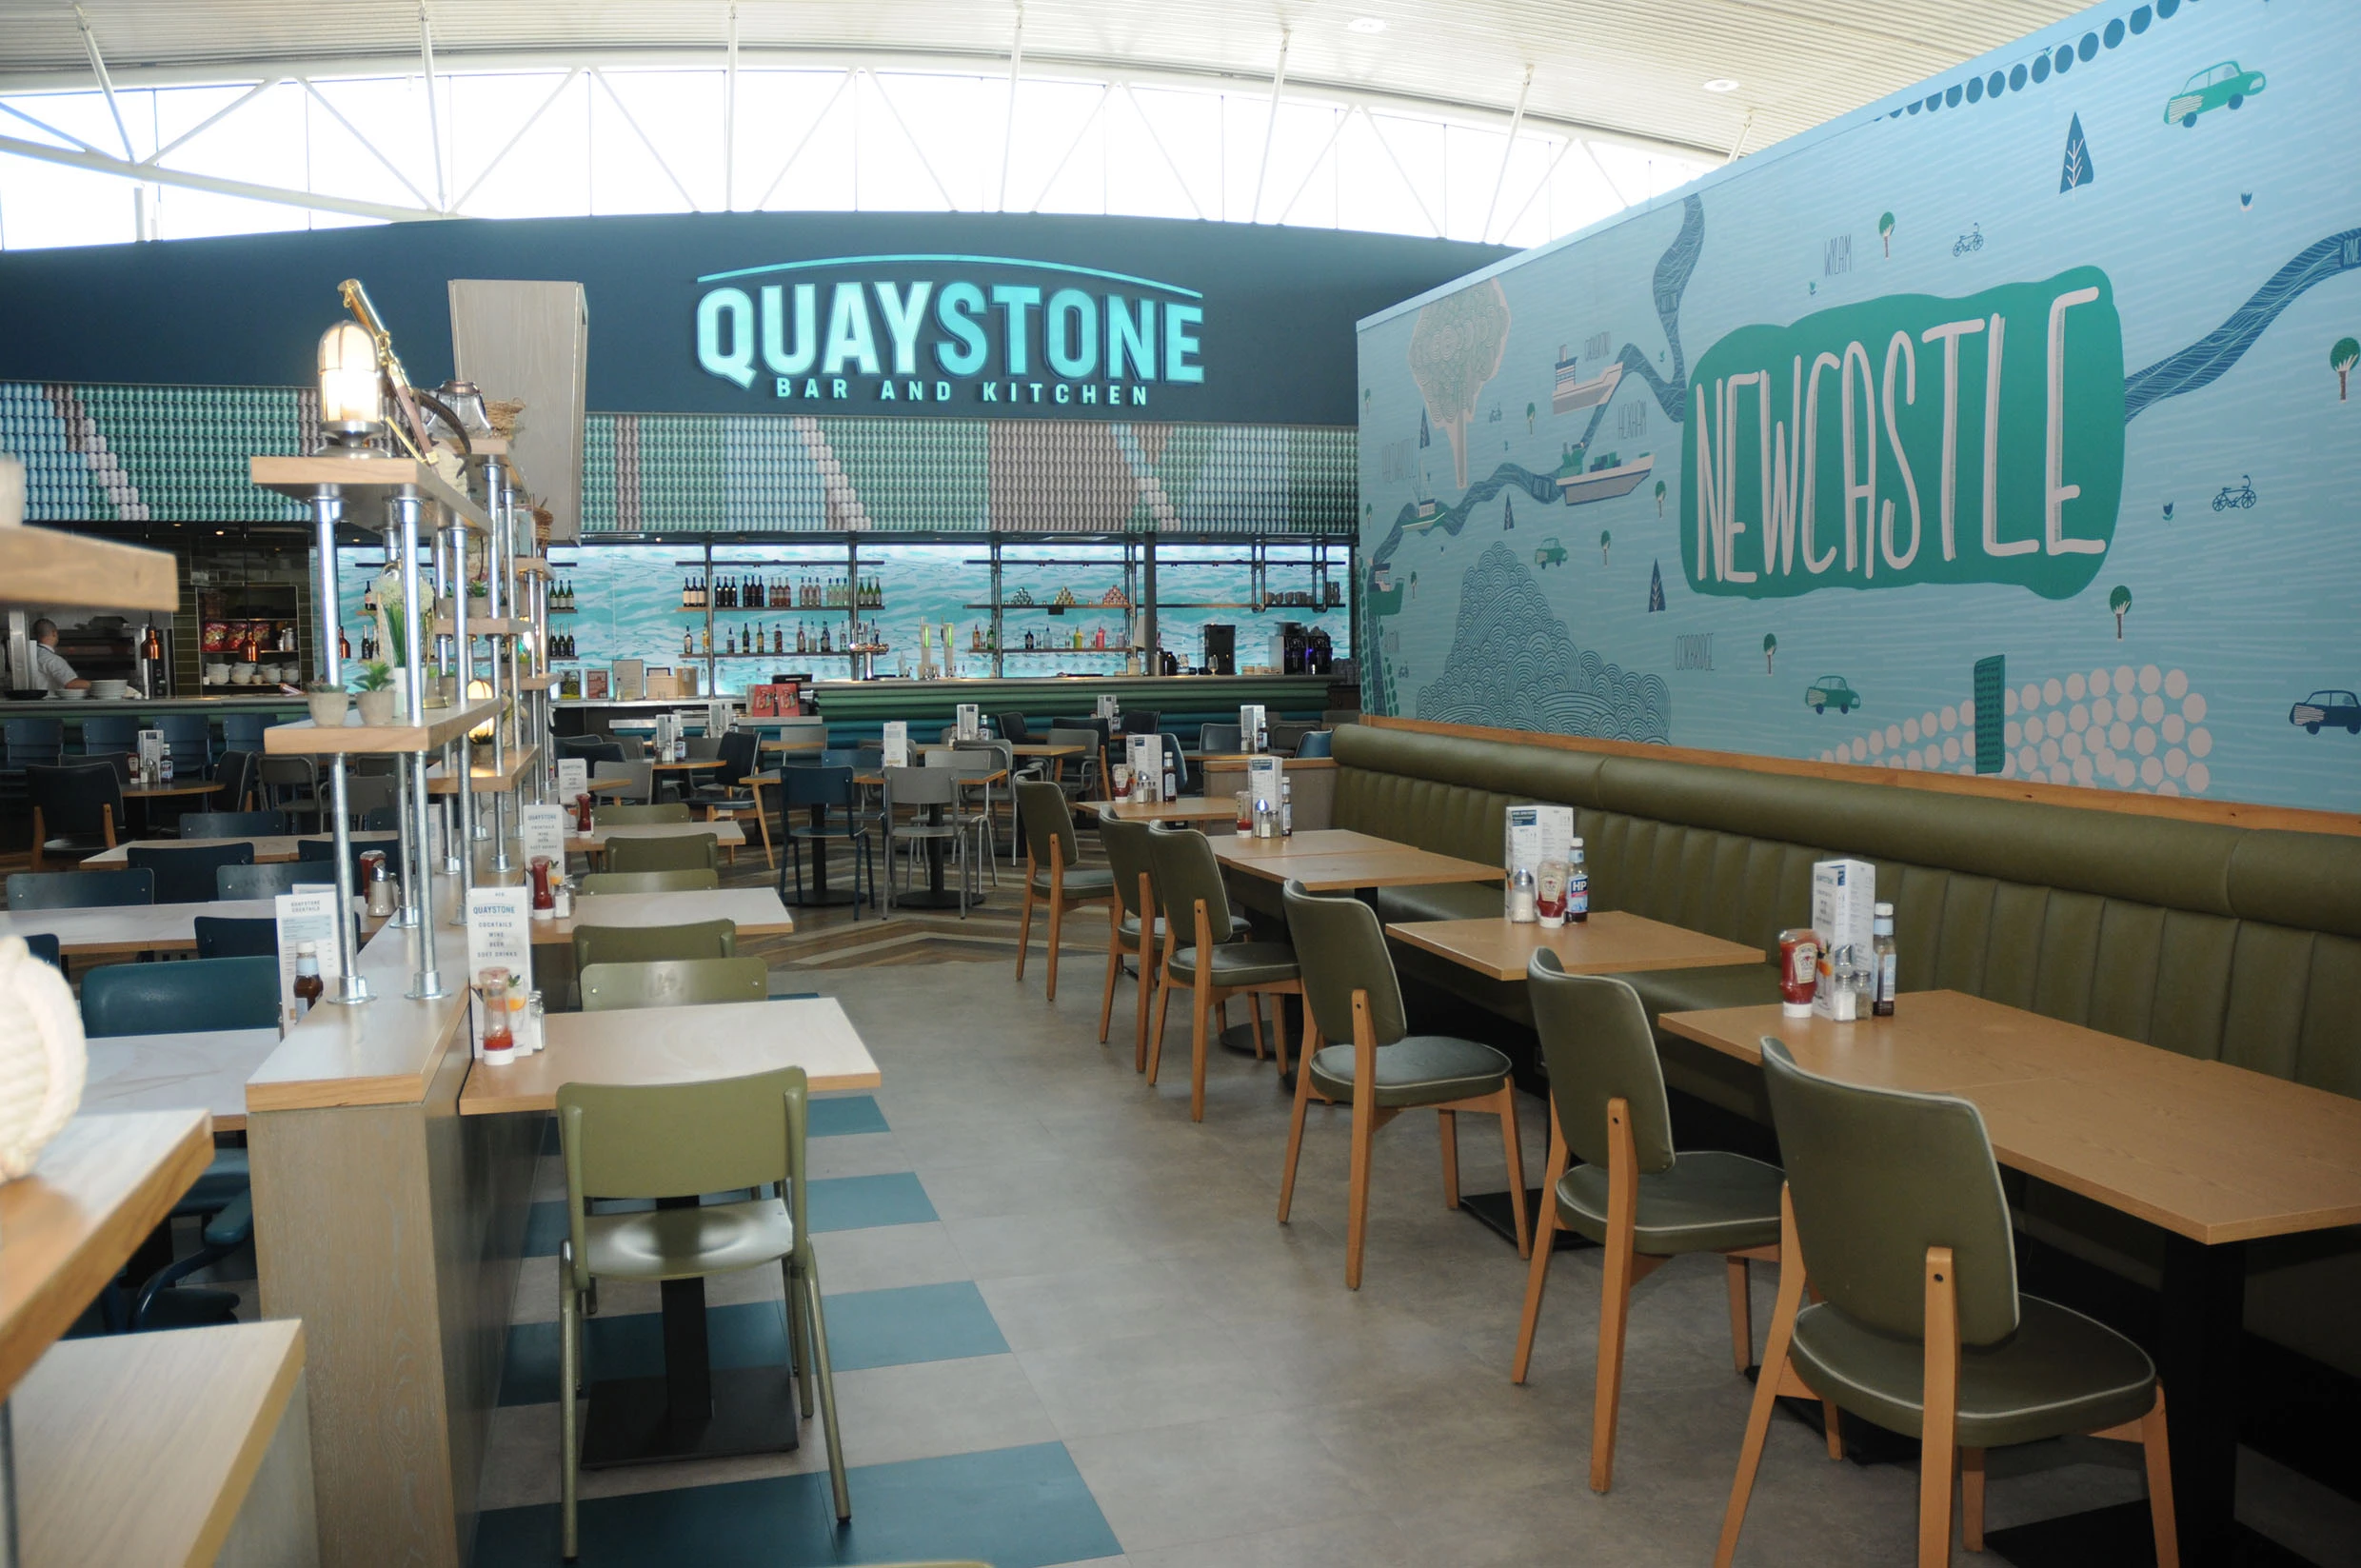 Quaystone Newcastle Airport